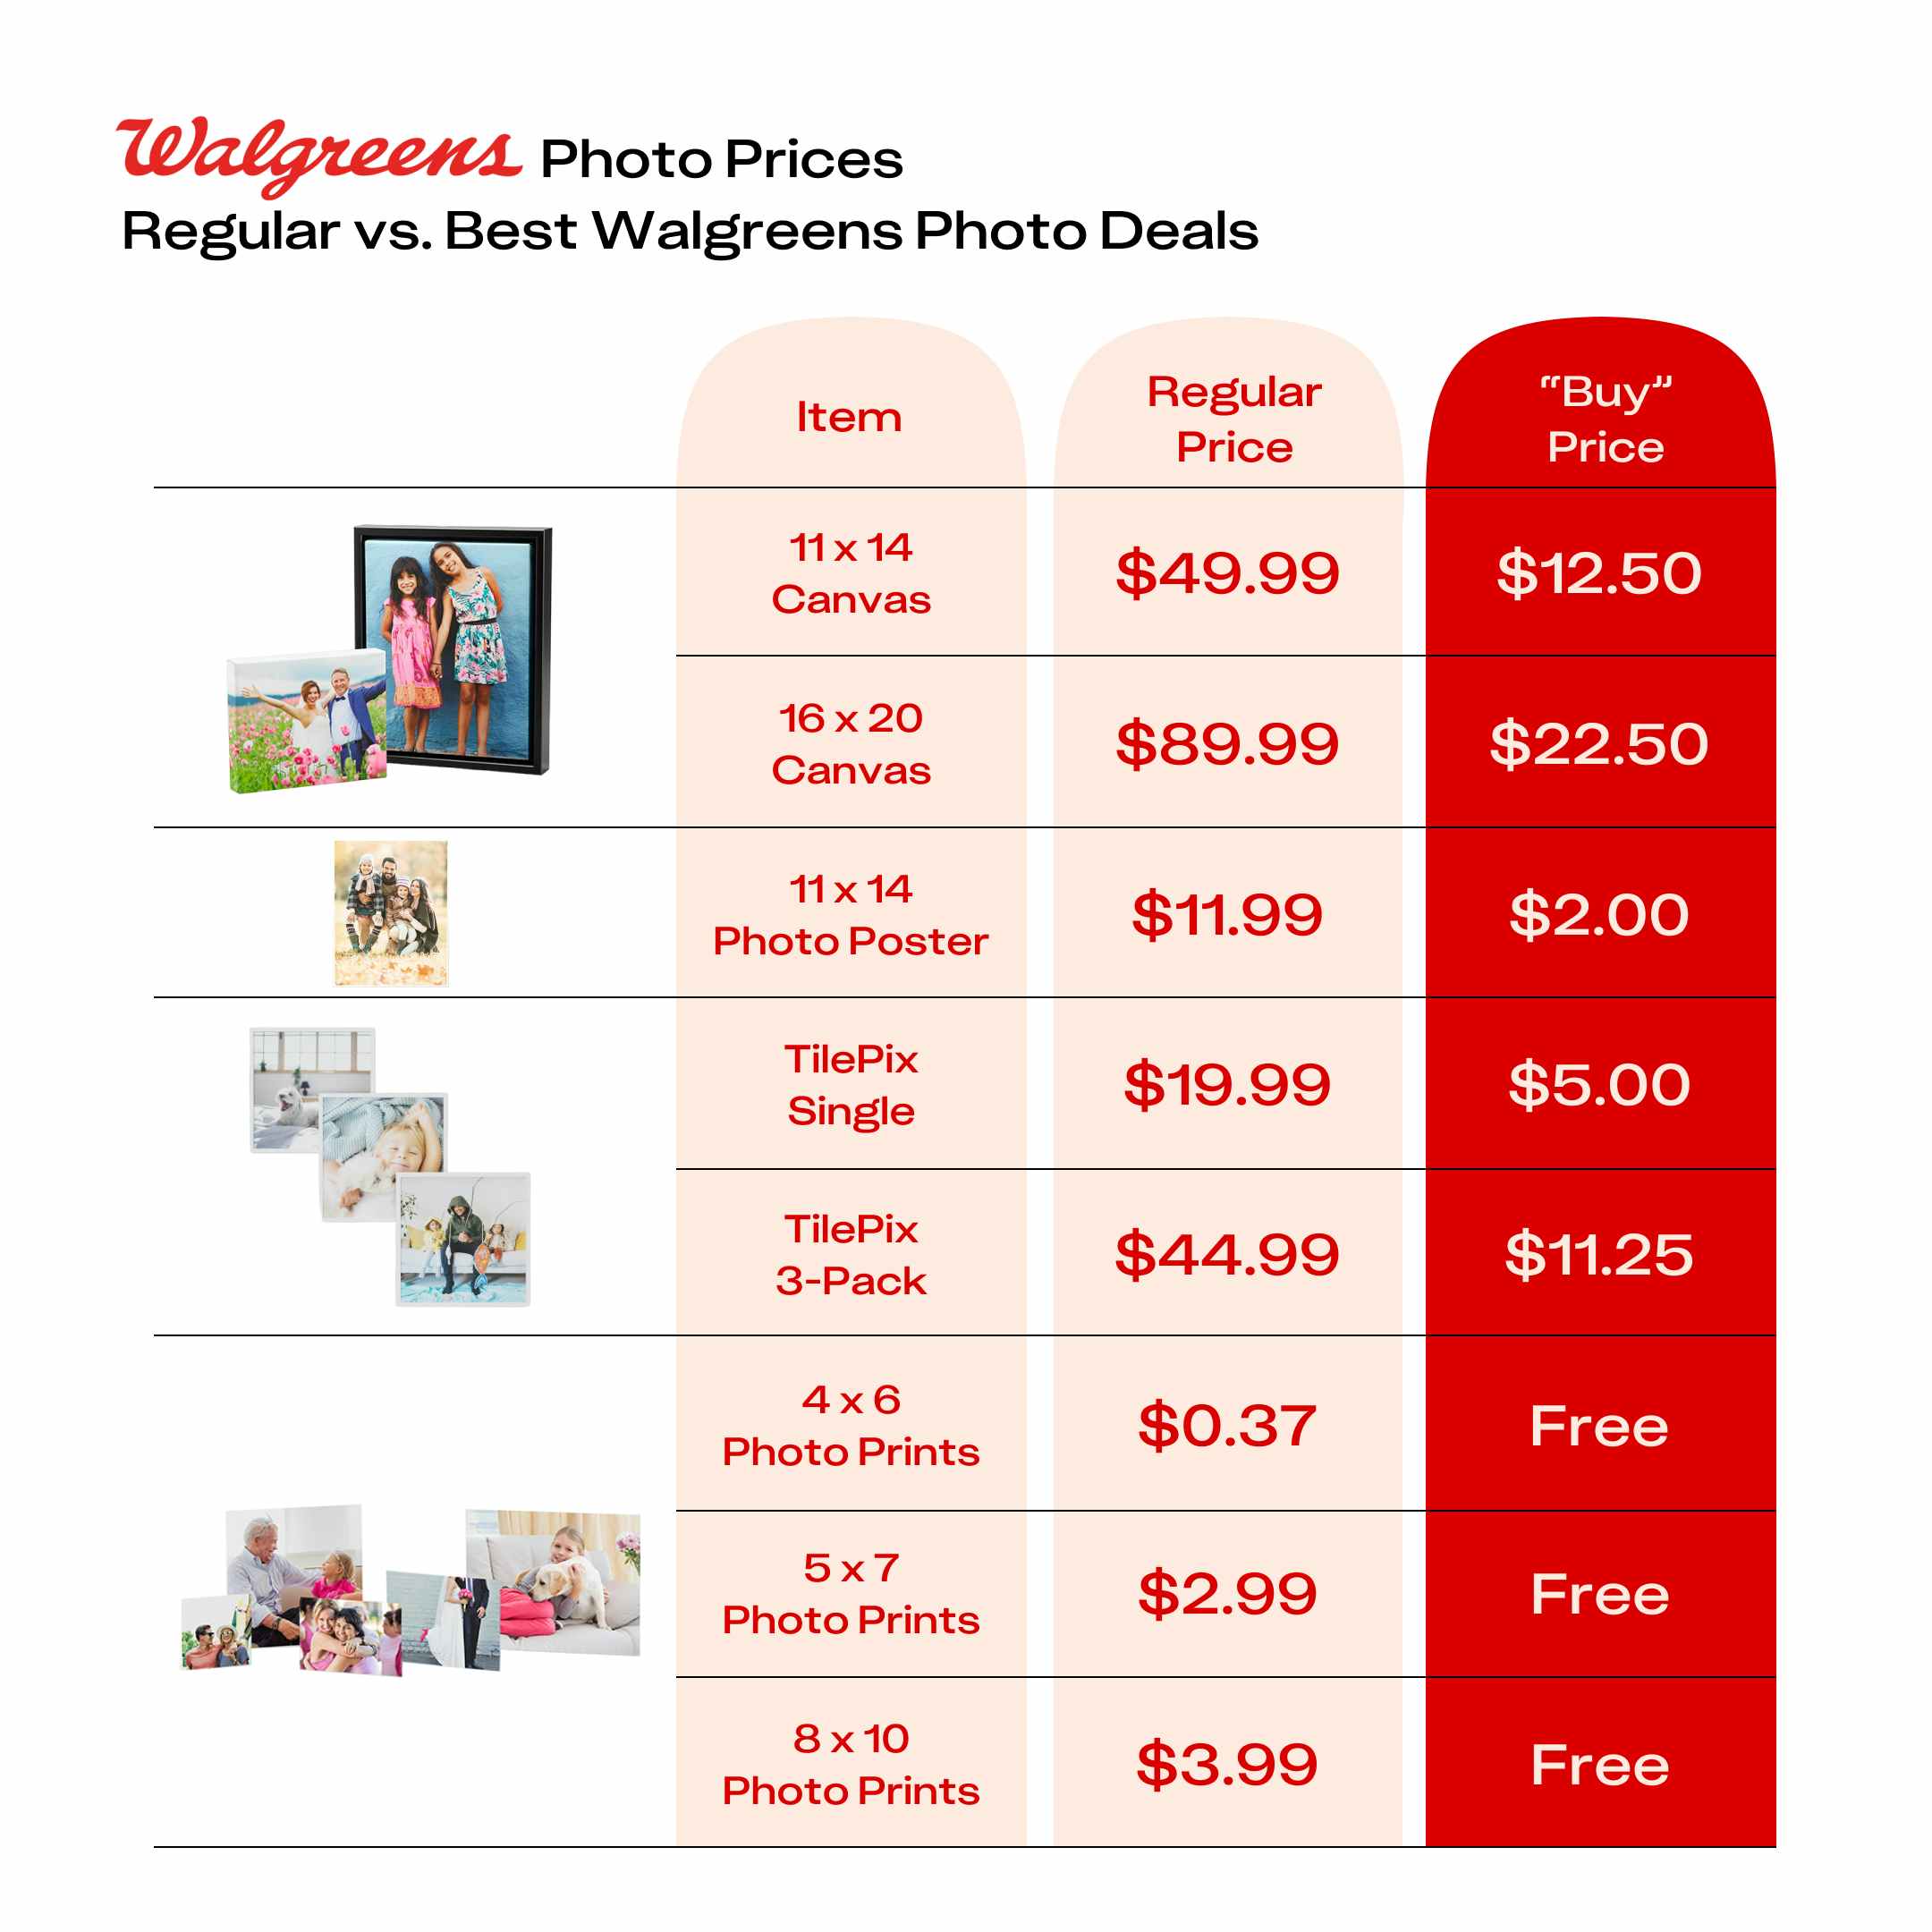 a table showing Walgreens photo deal prices compared to their regular prices